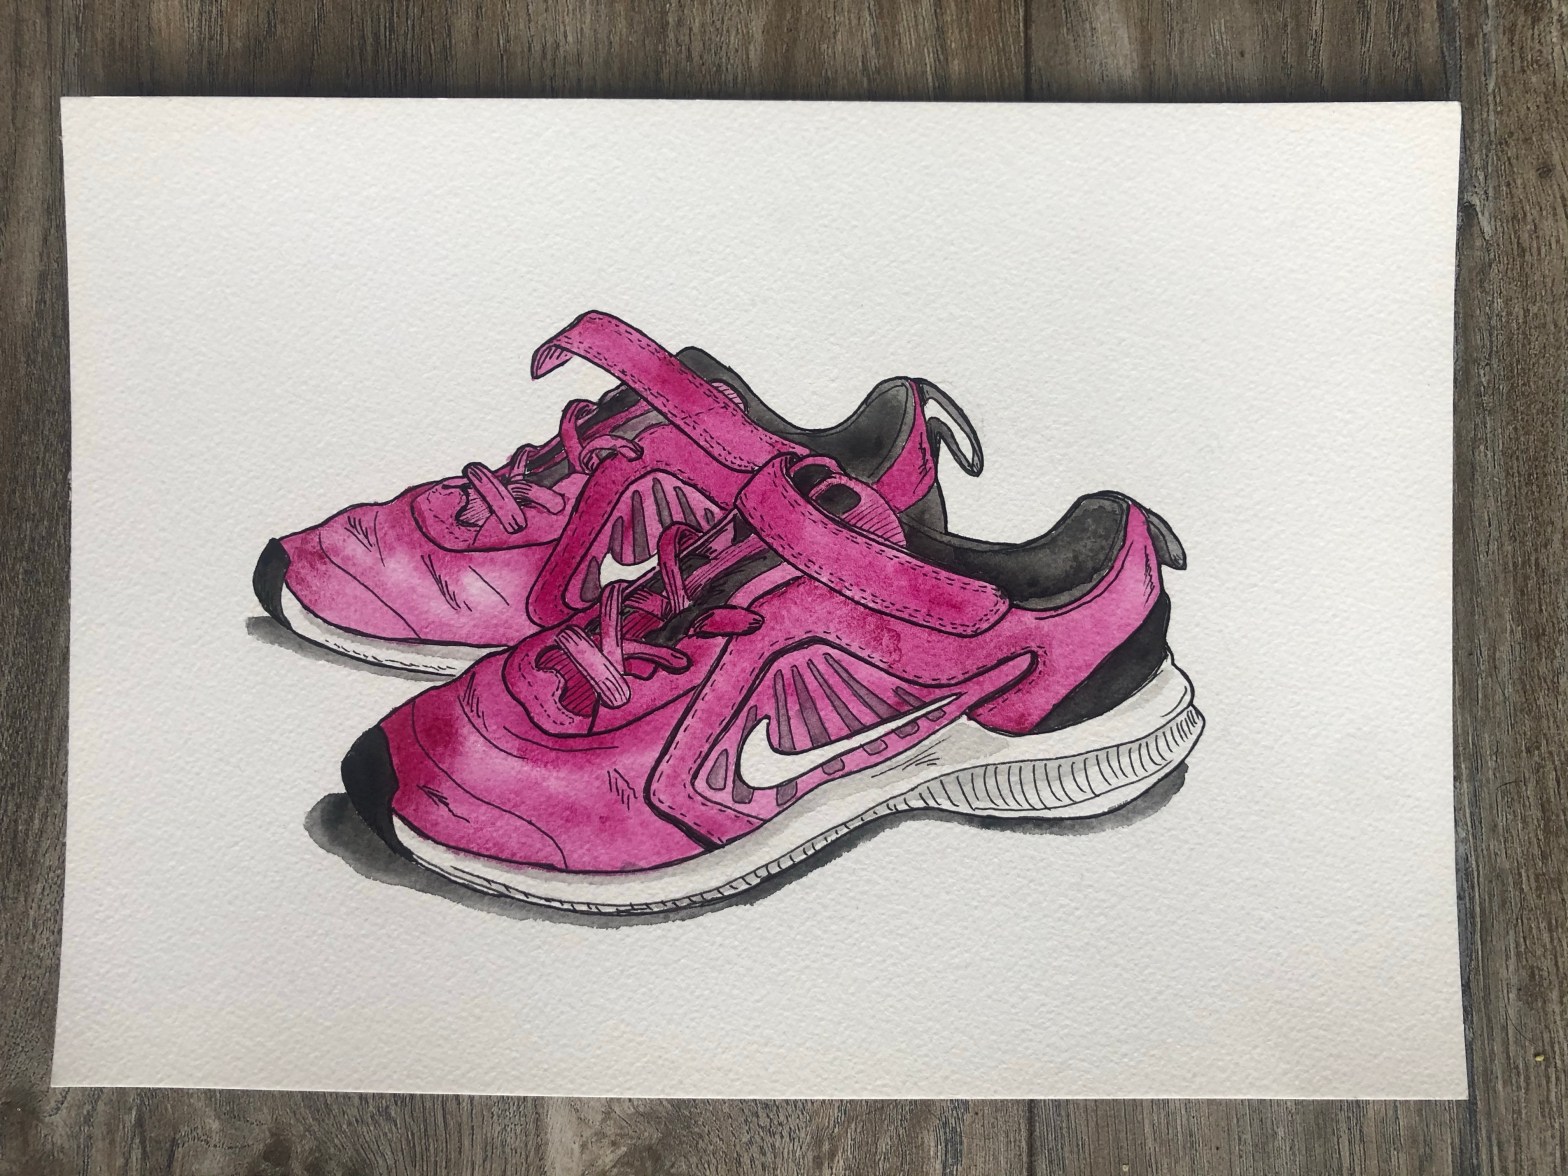 Watercolor illustration of kids Nike shoes.